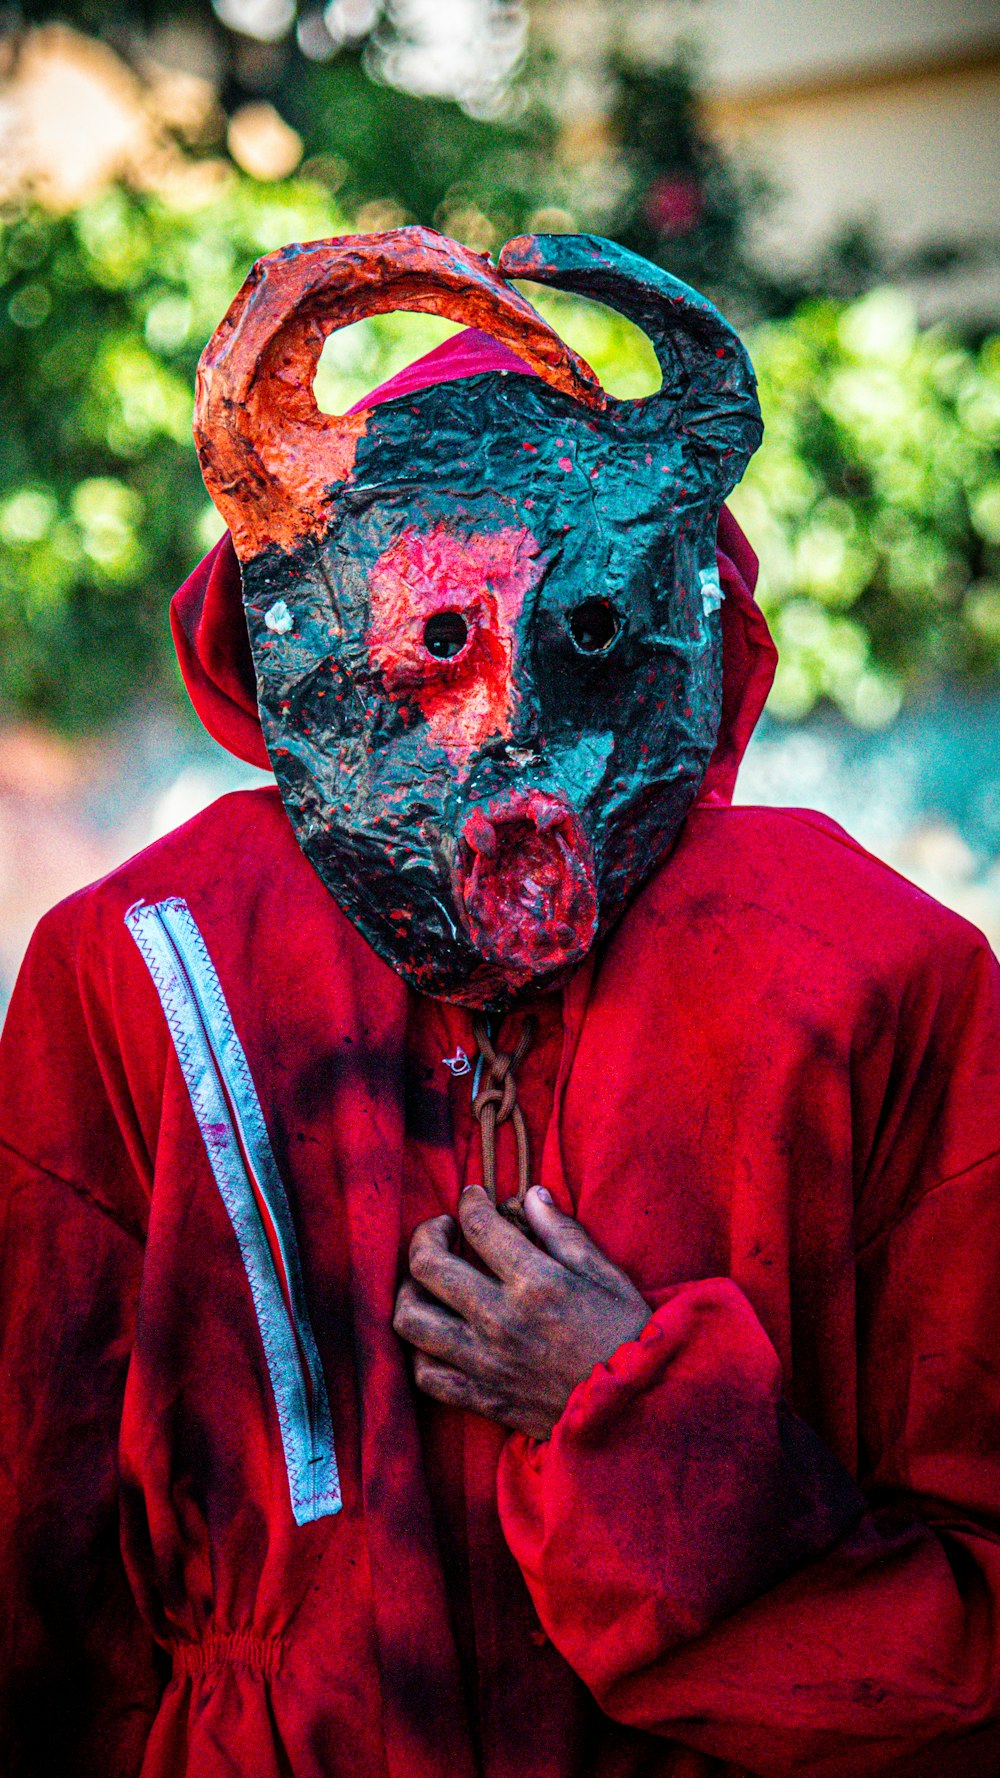 a person wearing a mask and a red jacket